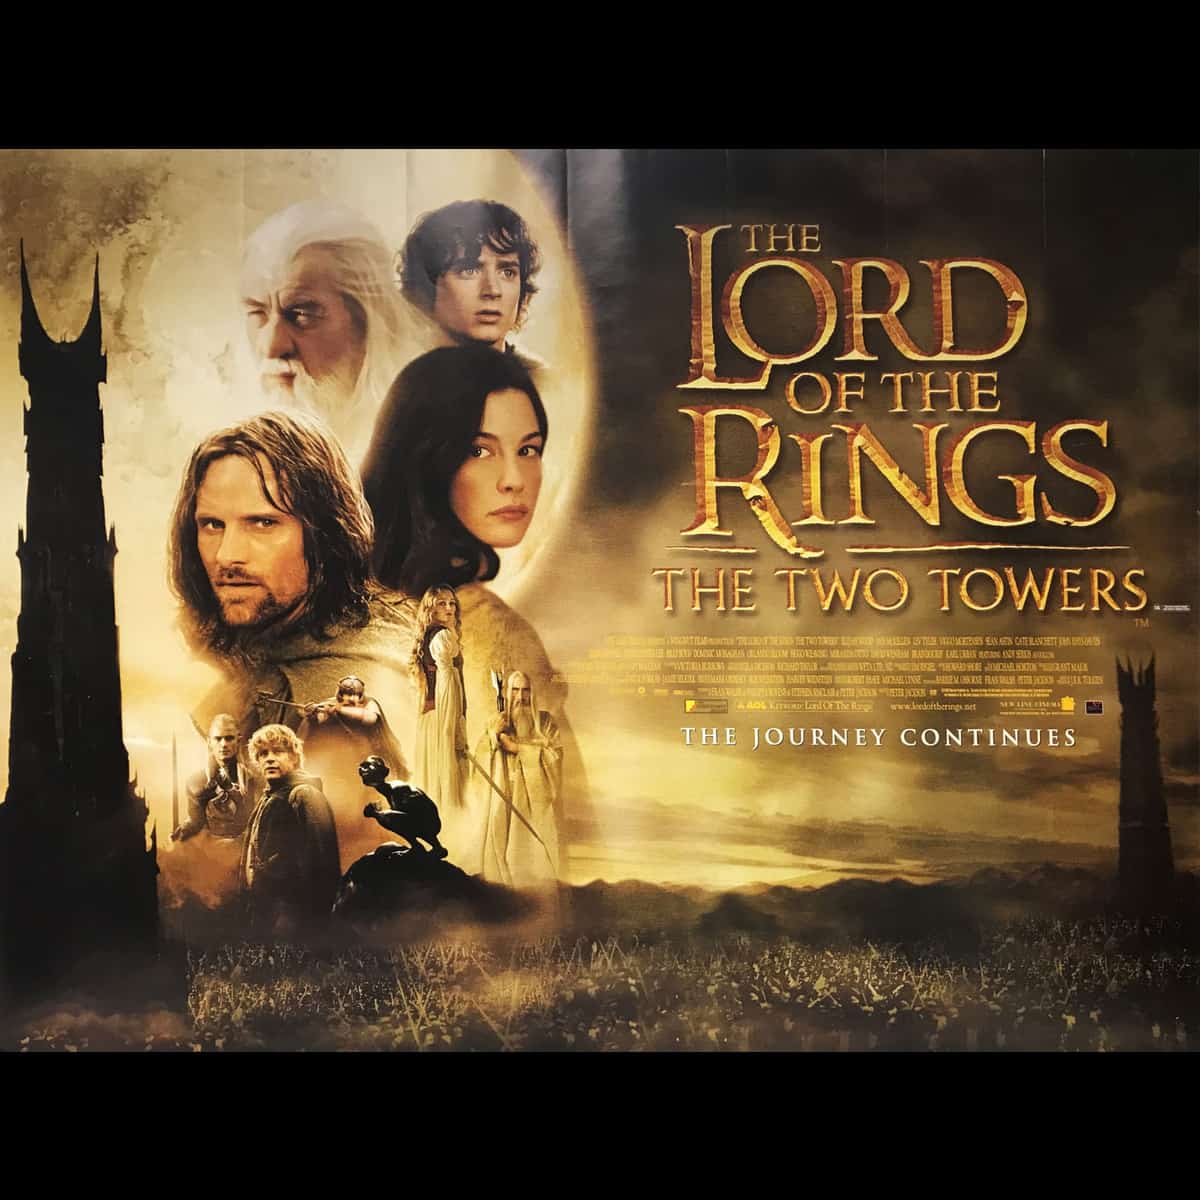 The Lord Of The Rings: The Two Towers (2002)